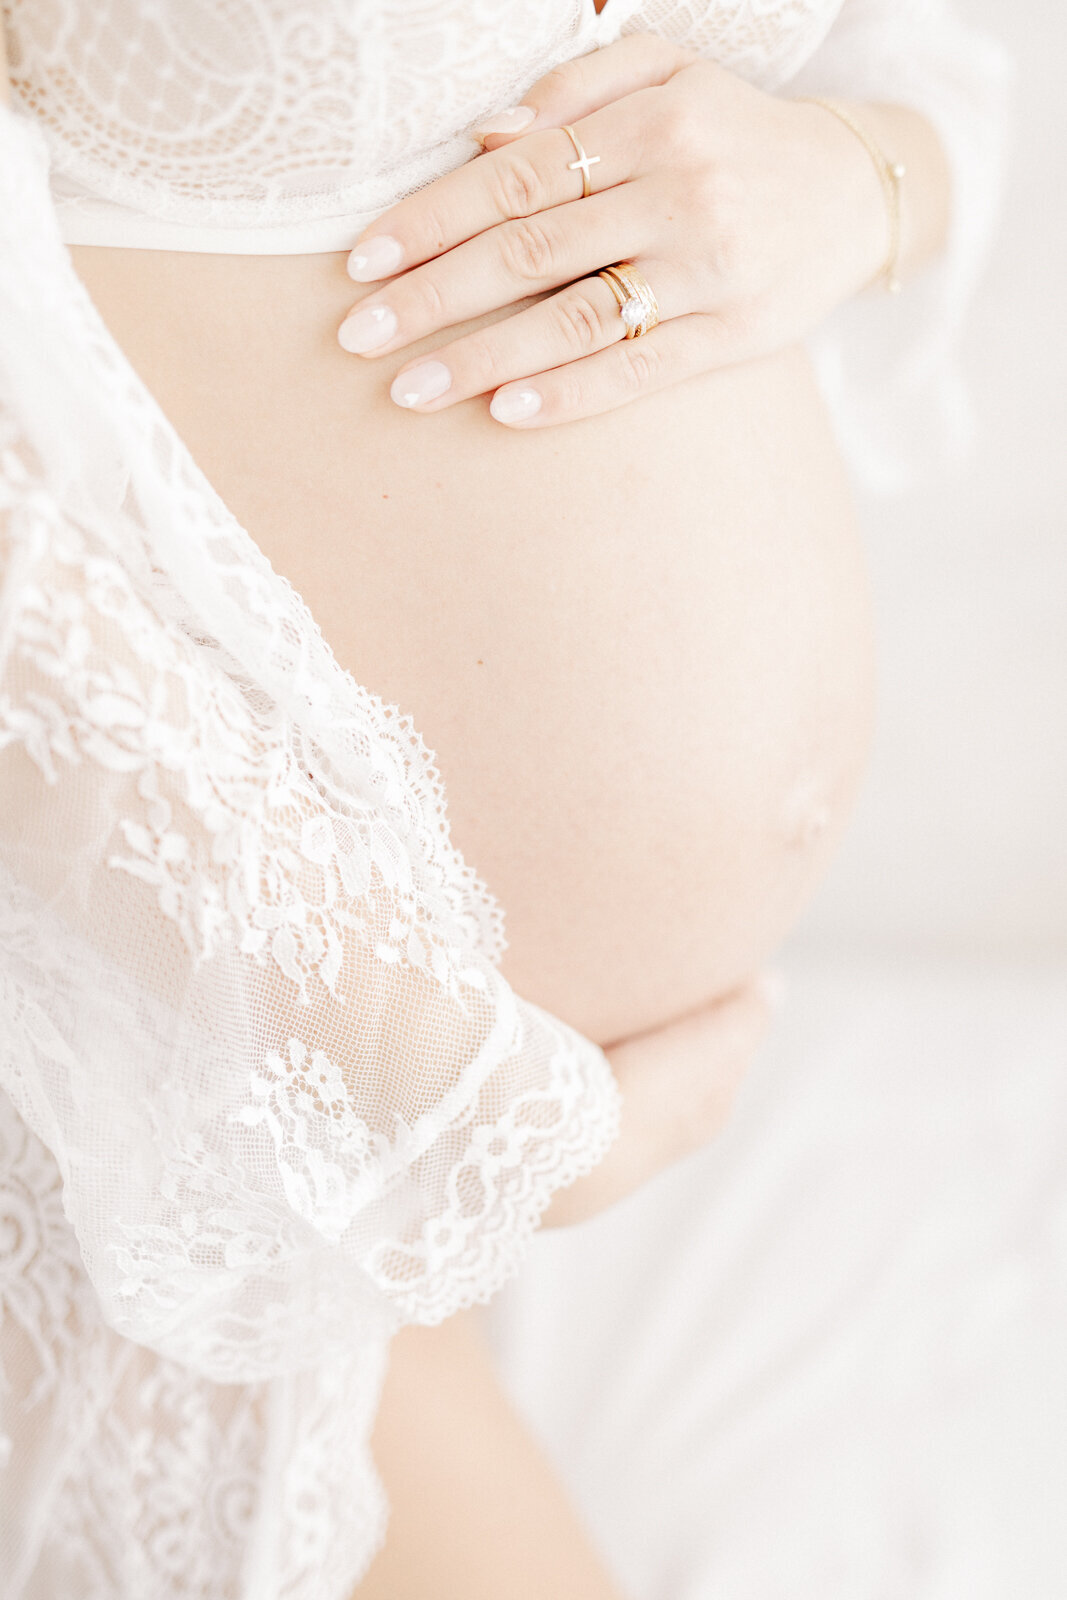 Maternity Photography in Bay Village